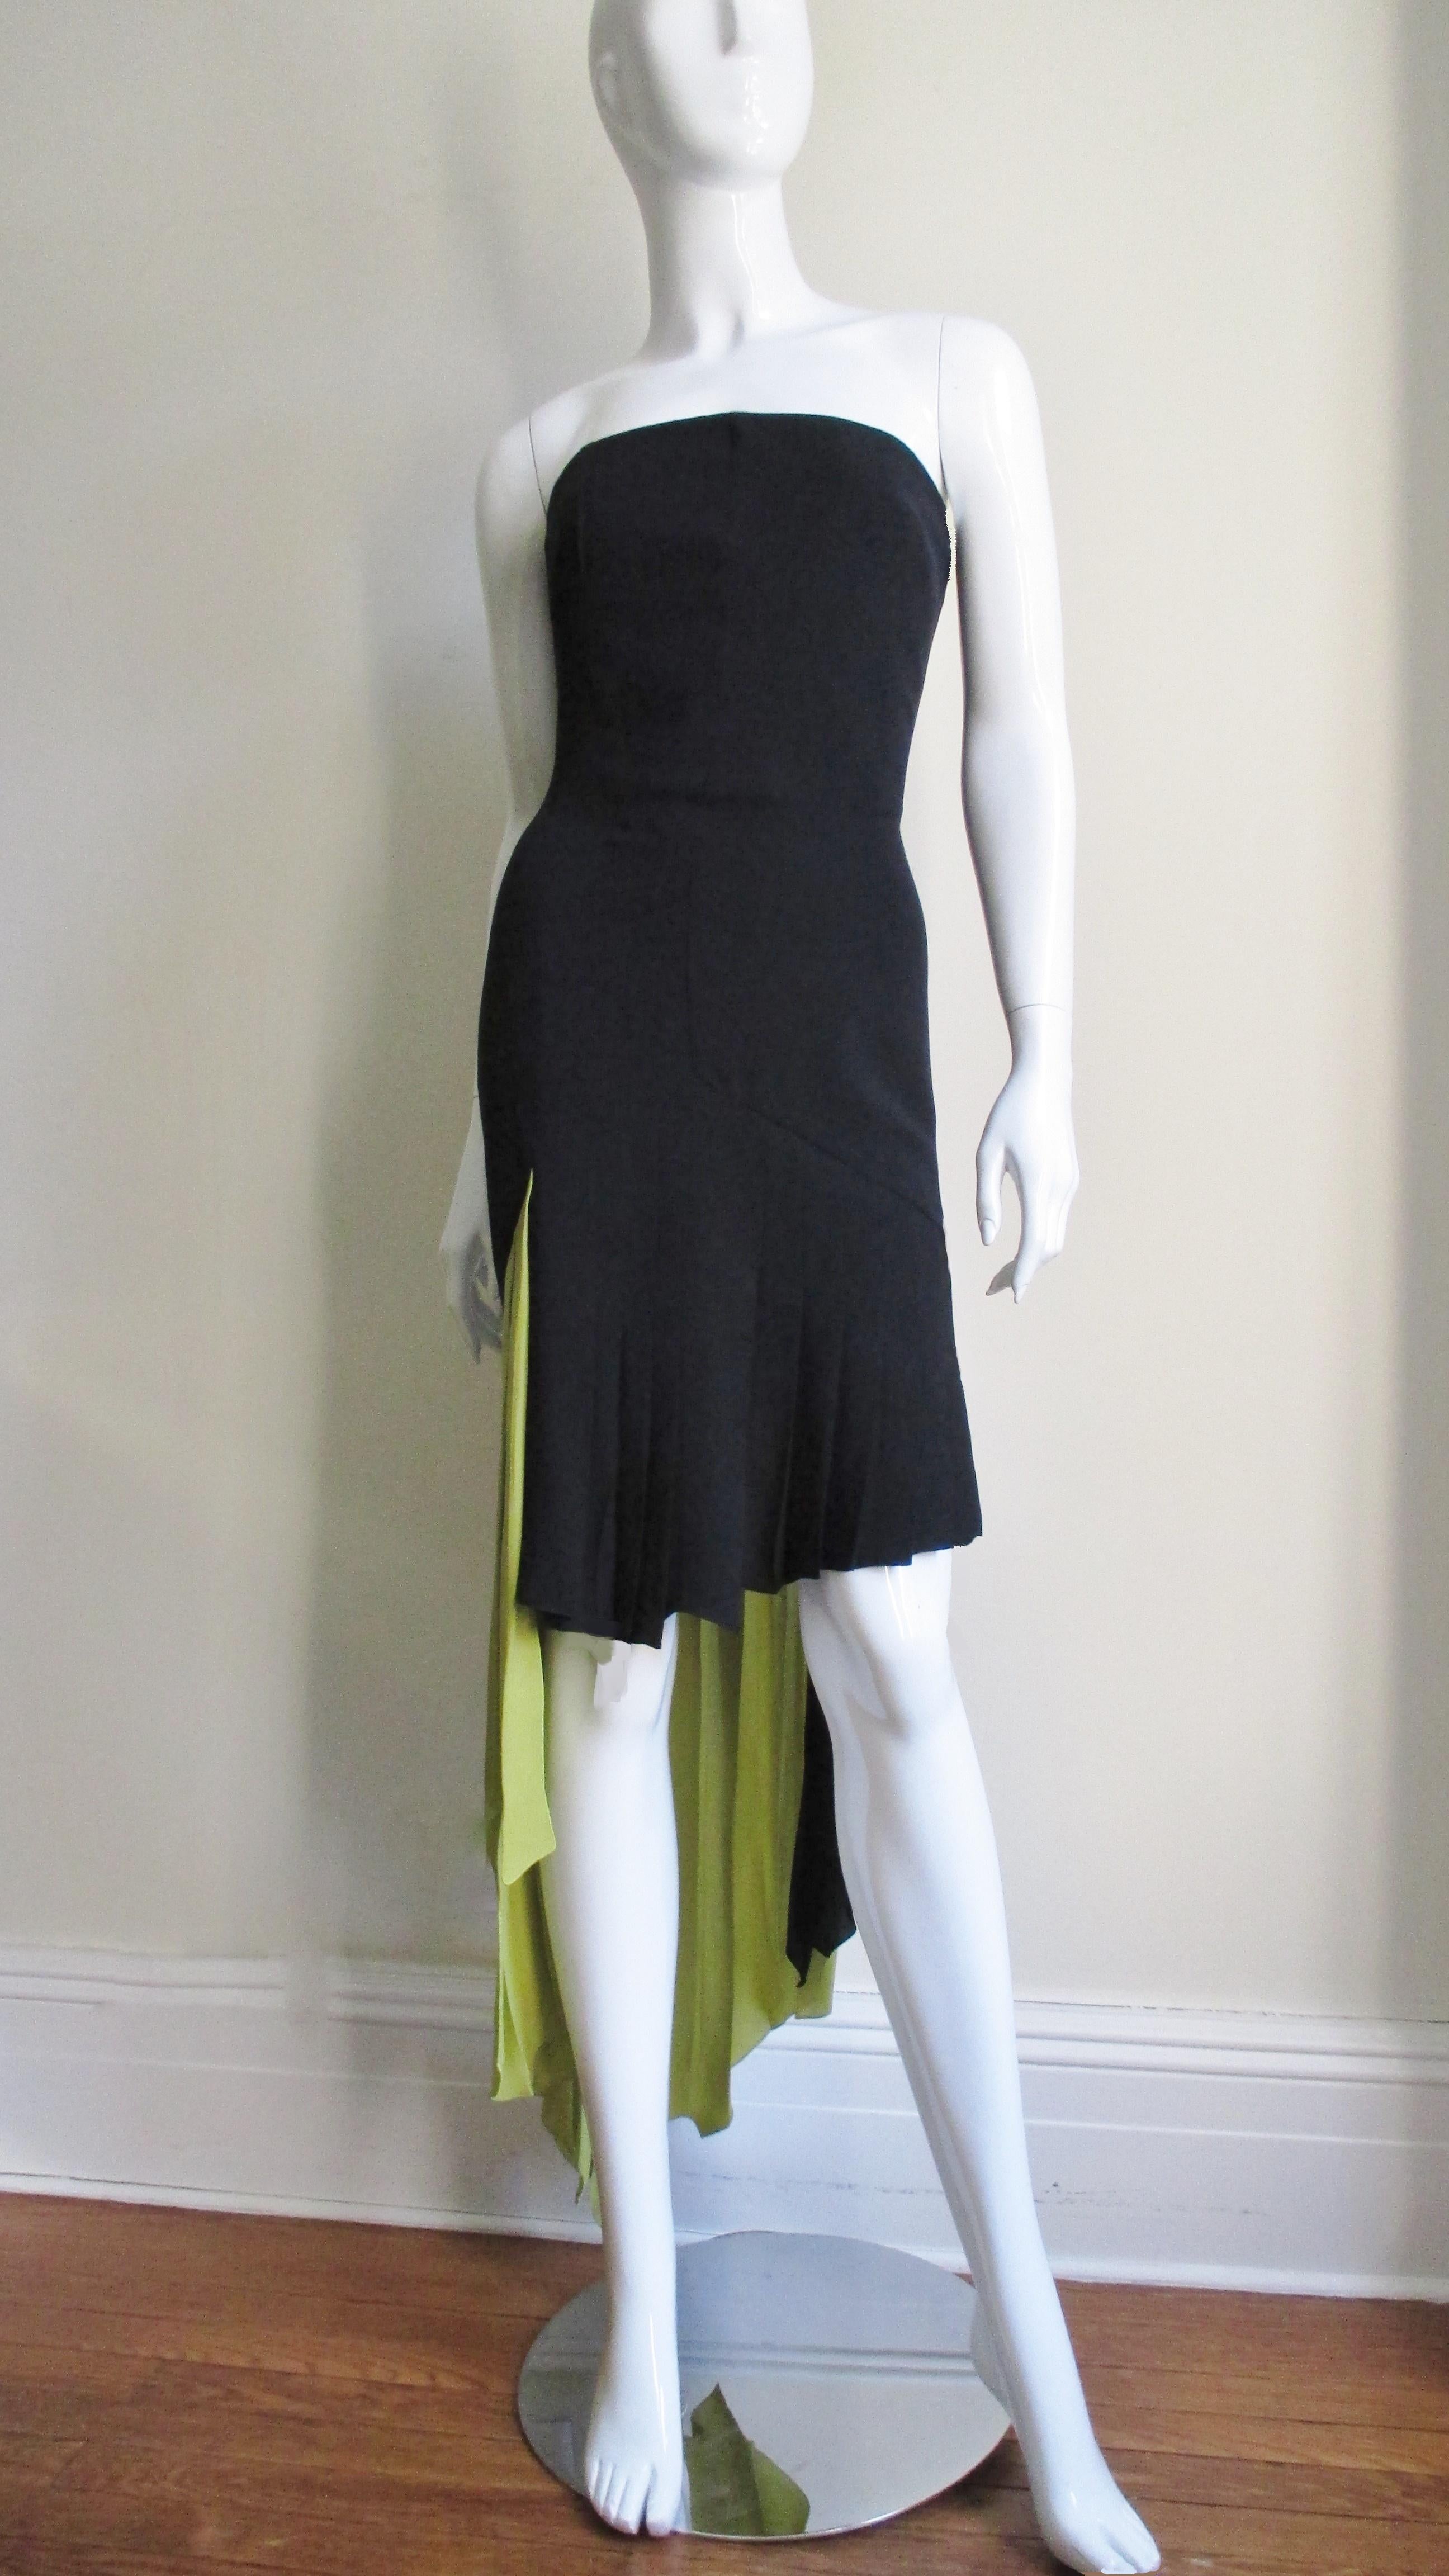 A dramatic vintage couture silk bustier color block dress in black and lime green with a high low asymmetrical hemline from Gianni Versace.  There are rows of seaming down the right side front and left side back into a pleated hem.  The dress has a